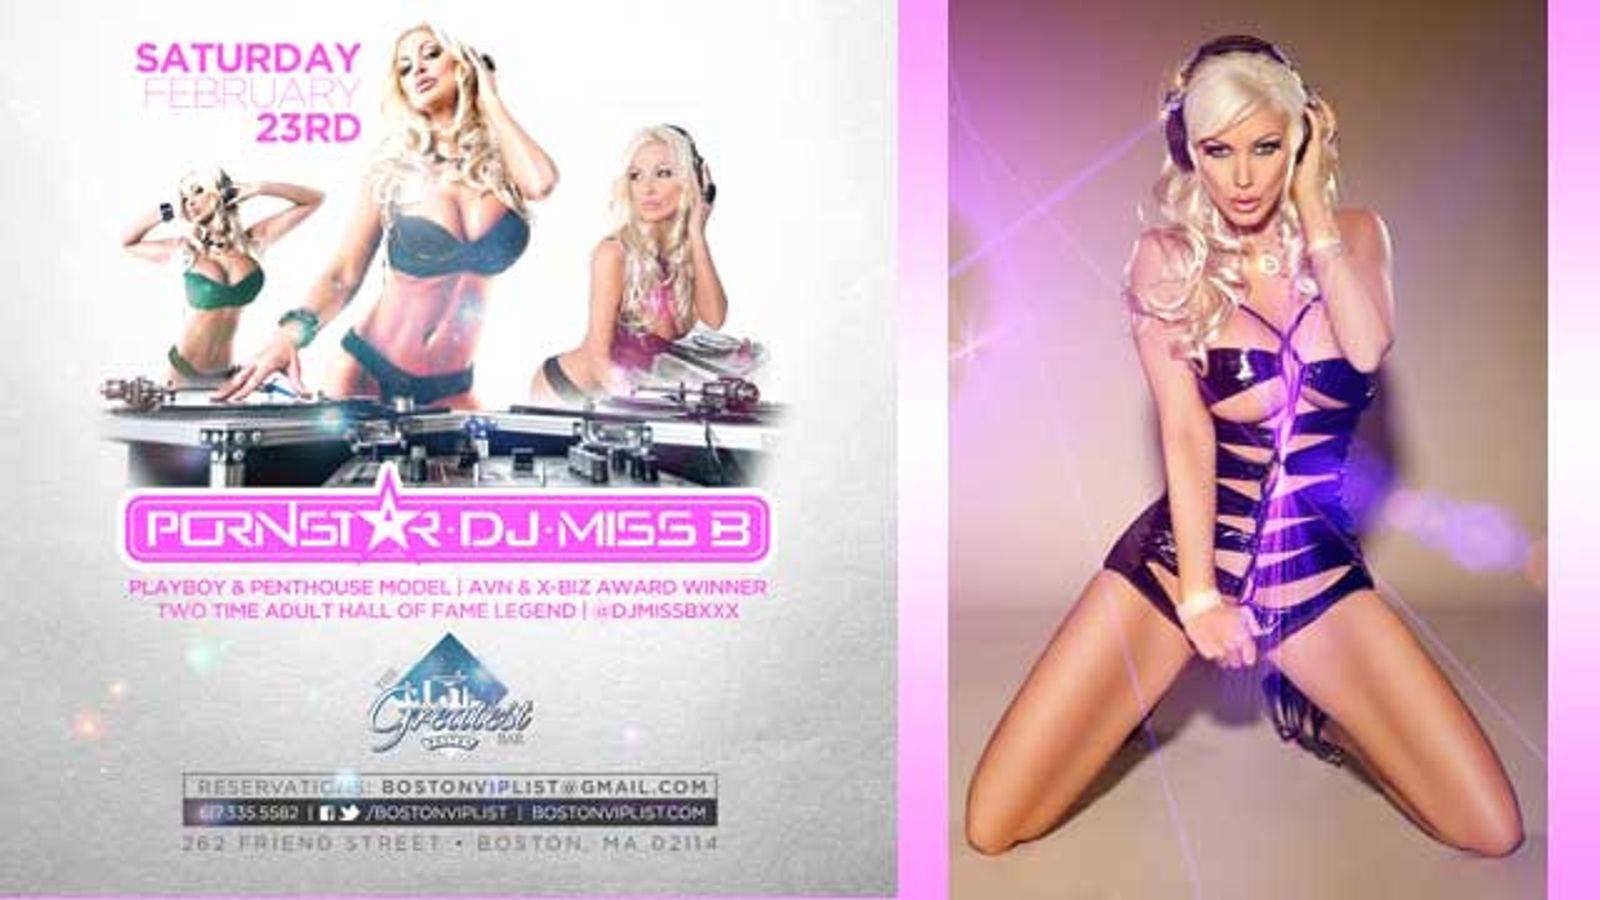 Adult Legend DJ Brittany Andrews To Spin At Greatest Bar Boston